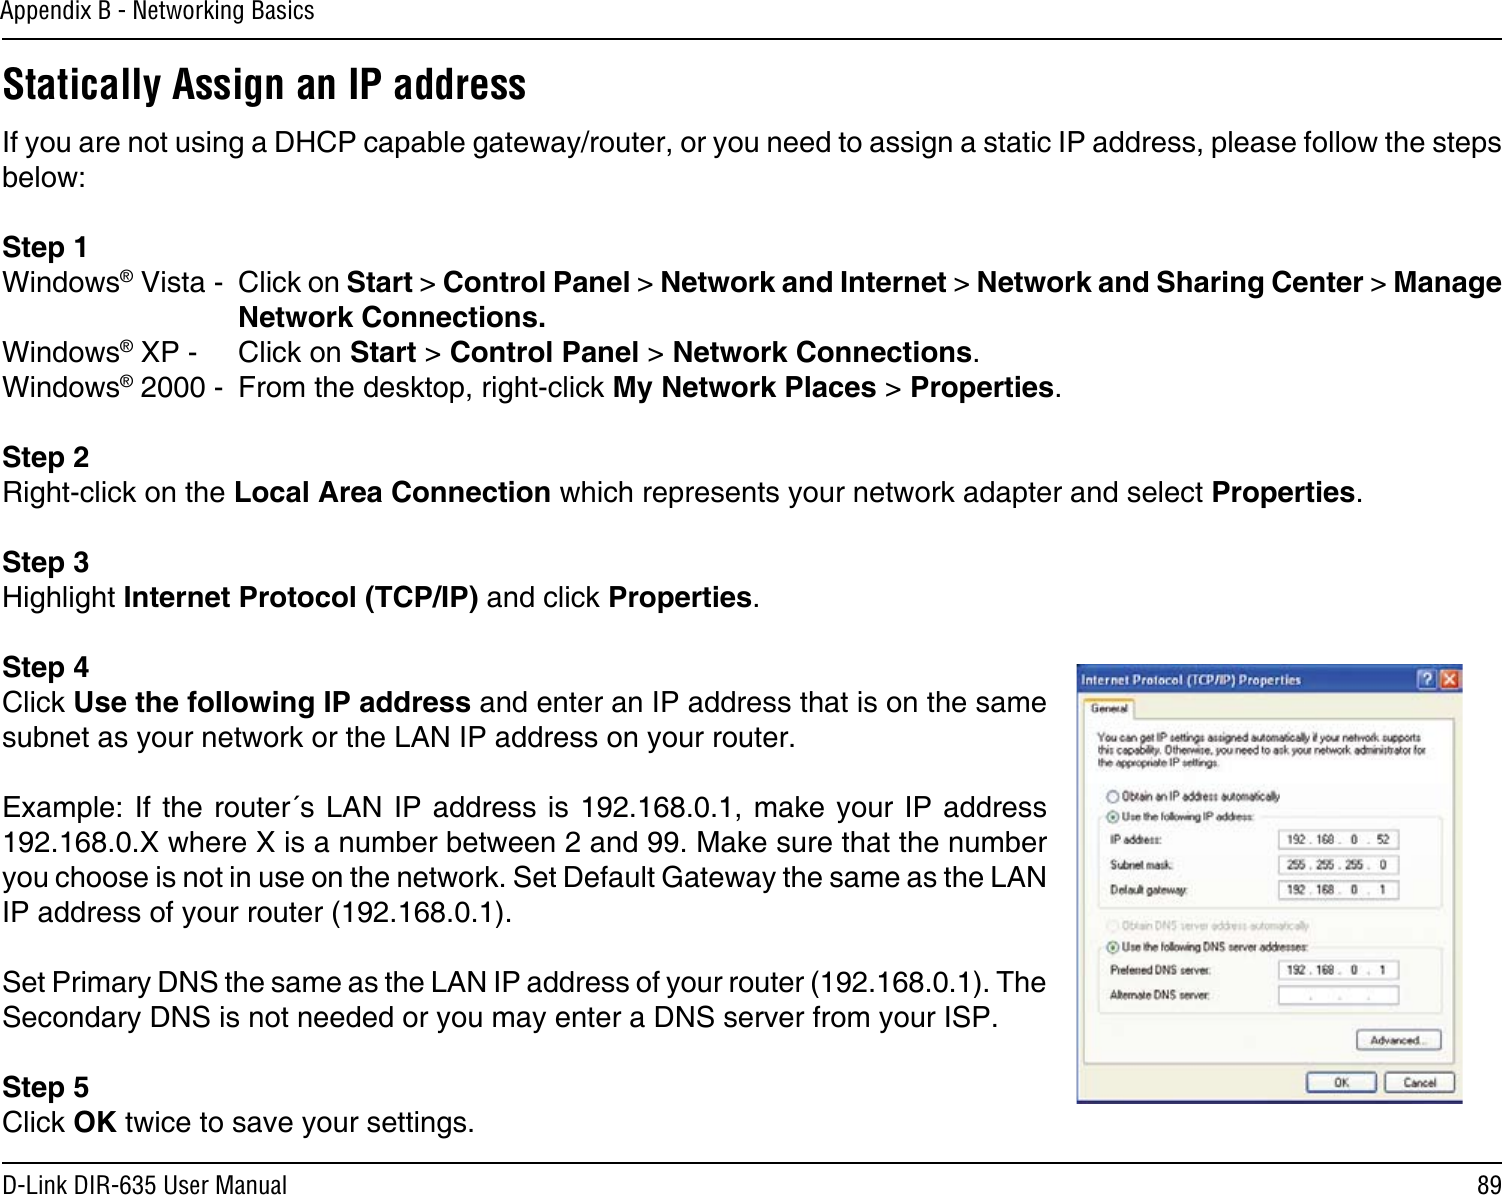 89D-Link DIR-635 User ManualAppendix B - Networking BasicsStatically Assign an IP addressIf you are not using a DHCP capable gateway/router, or you need to assign a static IP address, please follow the steps below:Step 1Windows® Vista -  Click on Start &gt; Control Panel &gt; Network and Internet &gt; Network and Sharing Center &gt; Manage Network Connections.Windows® XP -  Click on Start &gt; Control Panel &gt; Network Connections.Windows® 2000 -  From the desktop, right-click My Network Places &gt; Properties.Step 2Right-click on the Local Area Connection which represents your network adapter and select Properties.Step 3Highlight Internet Protocol (TCP/IP) and click Properties.Step 4Click Use the following IP address and enter an IP address that is on the same subnet as your network or the LAN IP address on your router. Example: If  the router´s  LAN IP address  is 192.168.0.1,  make your IP address 192.168.0.X where X is a number between 2 and 99. Make sure that the number you choose is not in use on the network. Set Default Gateway the same as the LAN IP address of your router (192.168.0.1). Set Primary DNS the same as the LAN IP address of your router (192.168.0.1). The Secondary DNS is not needed or you may enter a DNS server from your ISP.Step 5Click OK twice to save your settings.